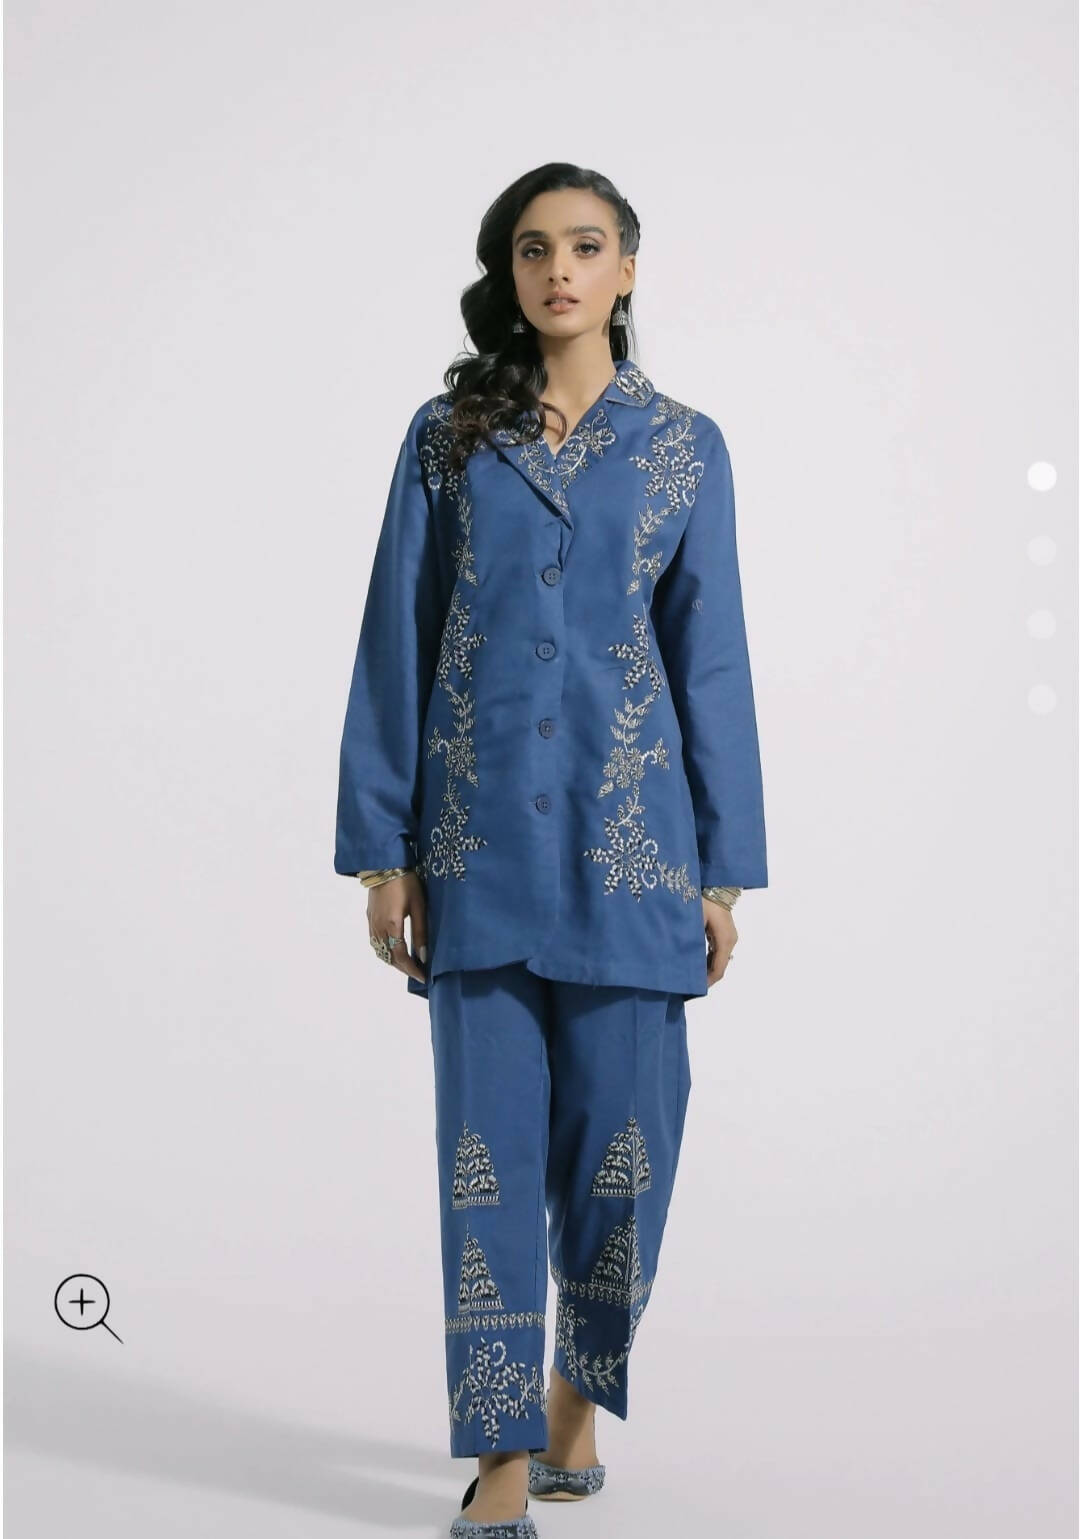 Ethnic | Full Embroided Shirt Embroided Trouser (Size: M ) | Women Tops & Shirts | Worn Once